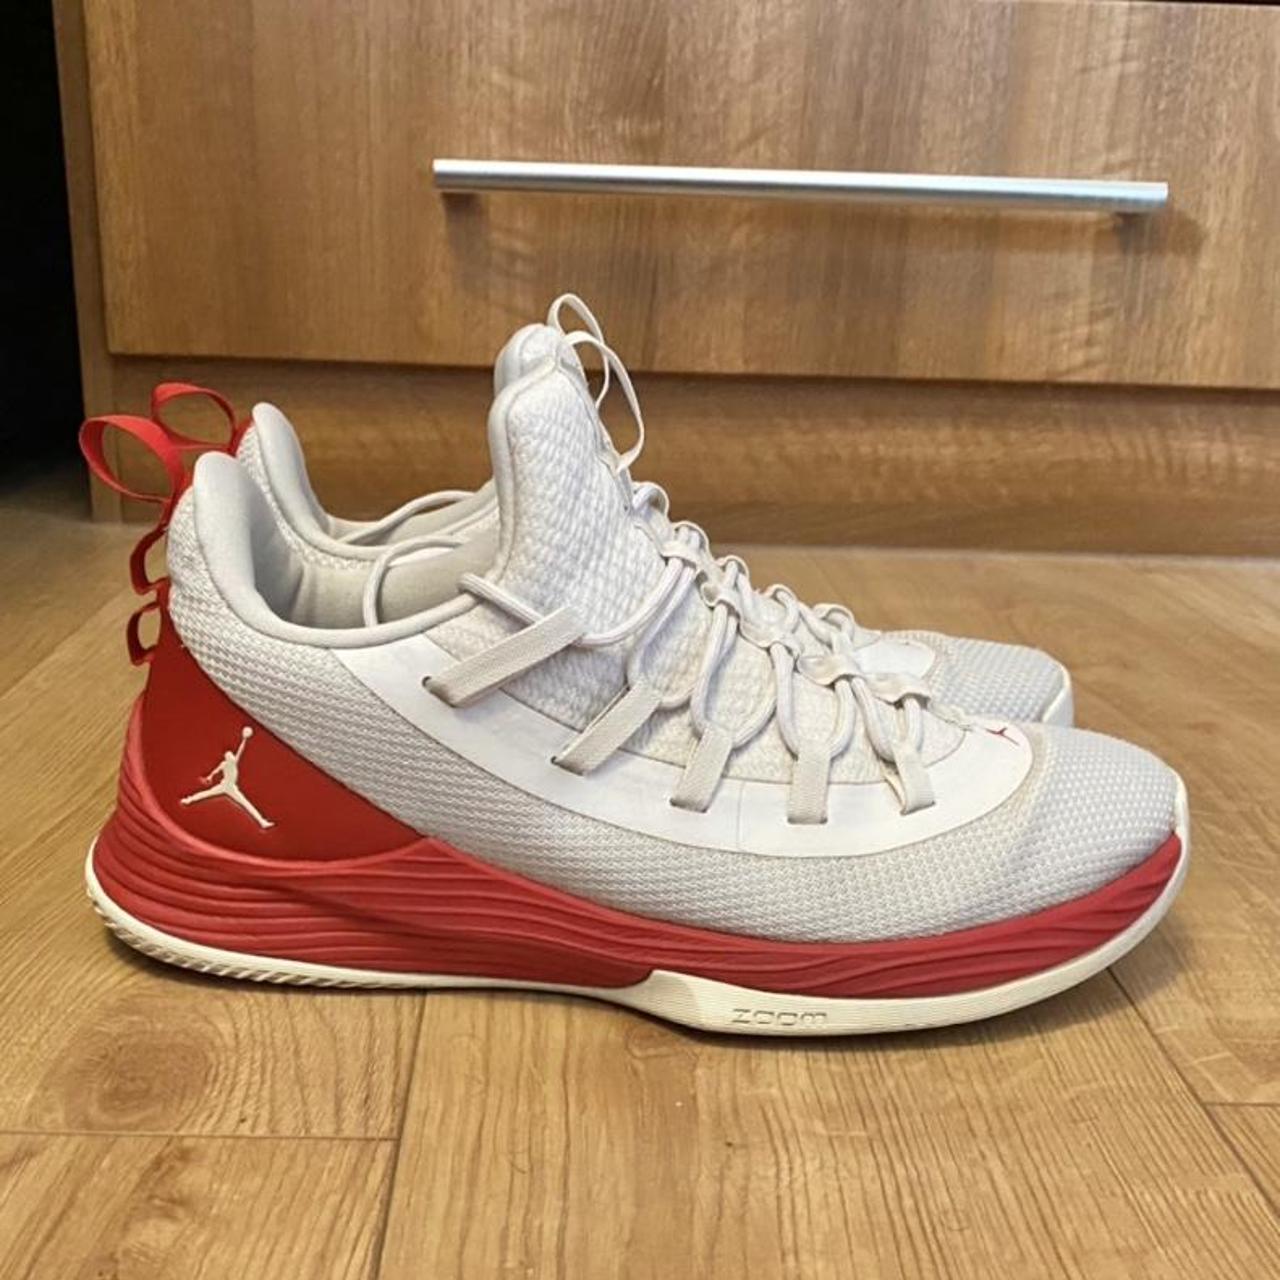 Nike Air Jordan Ultra Fly 2 Low White/Red. , Barely...